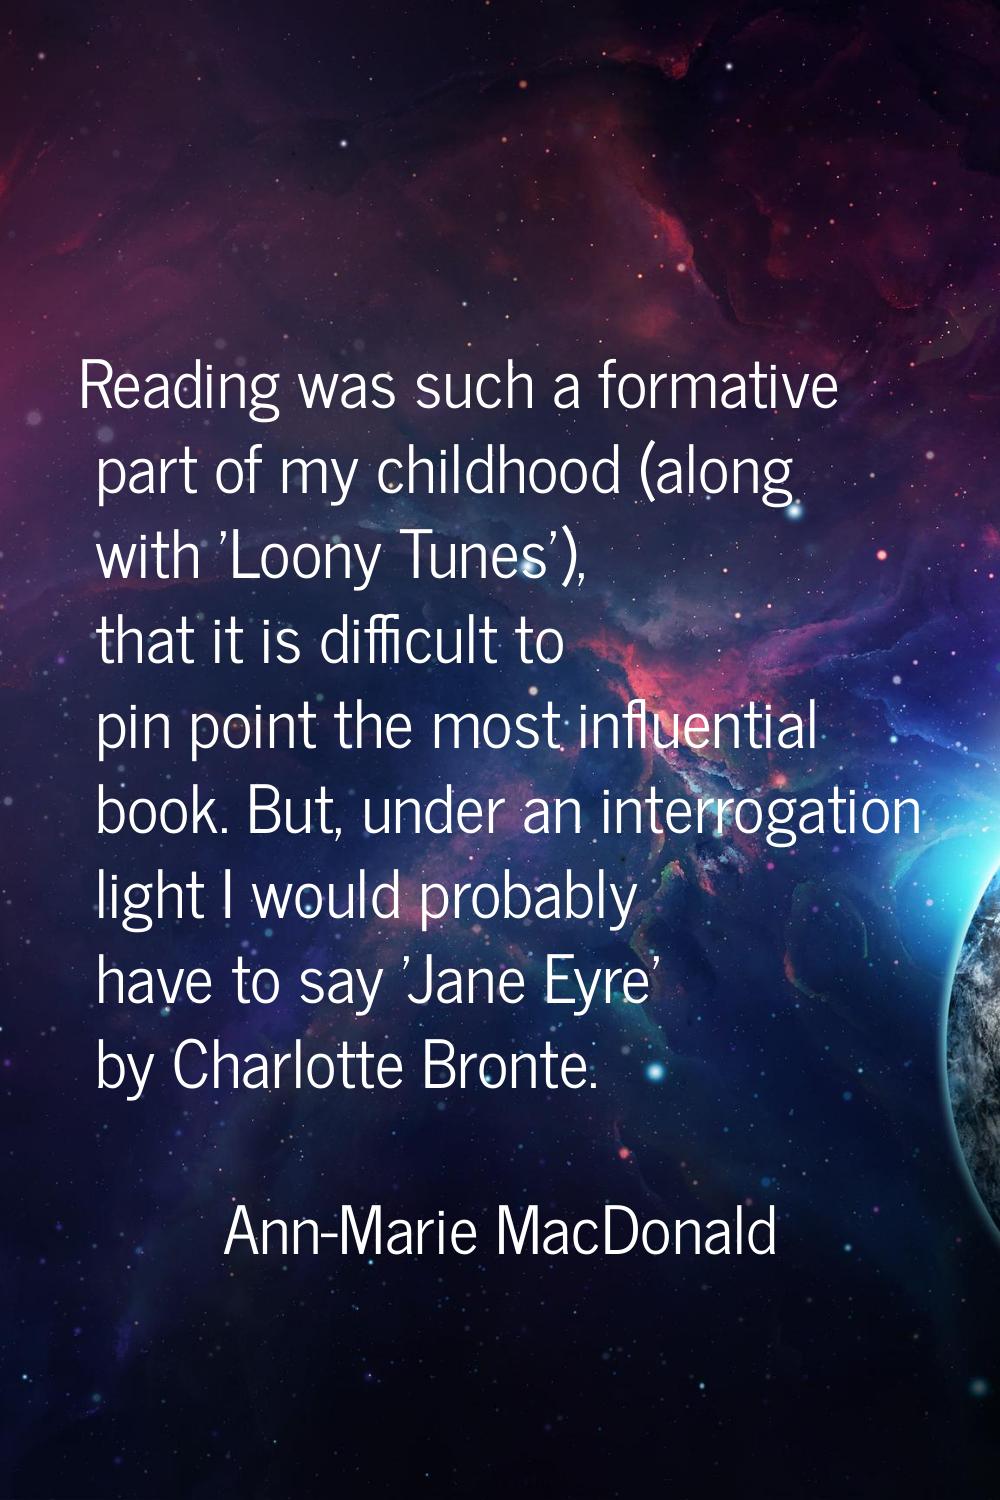 Reading was such a formative part of my childhood (along with 'Loony Tunes'), that it is difficult 